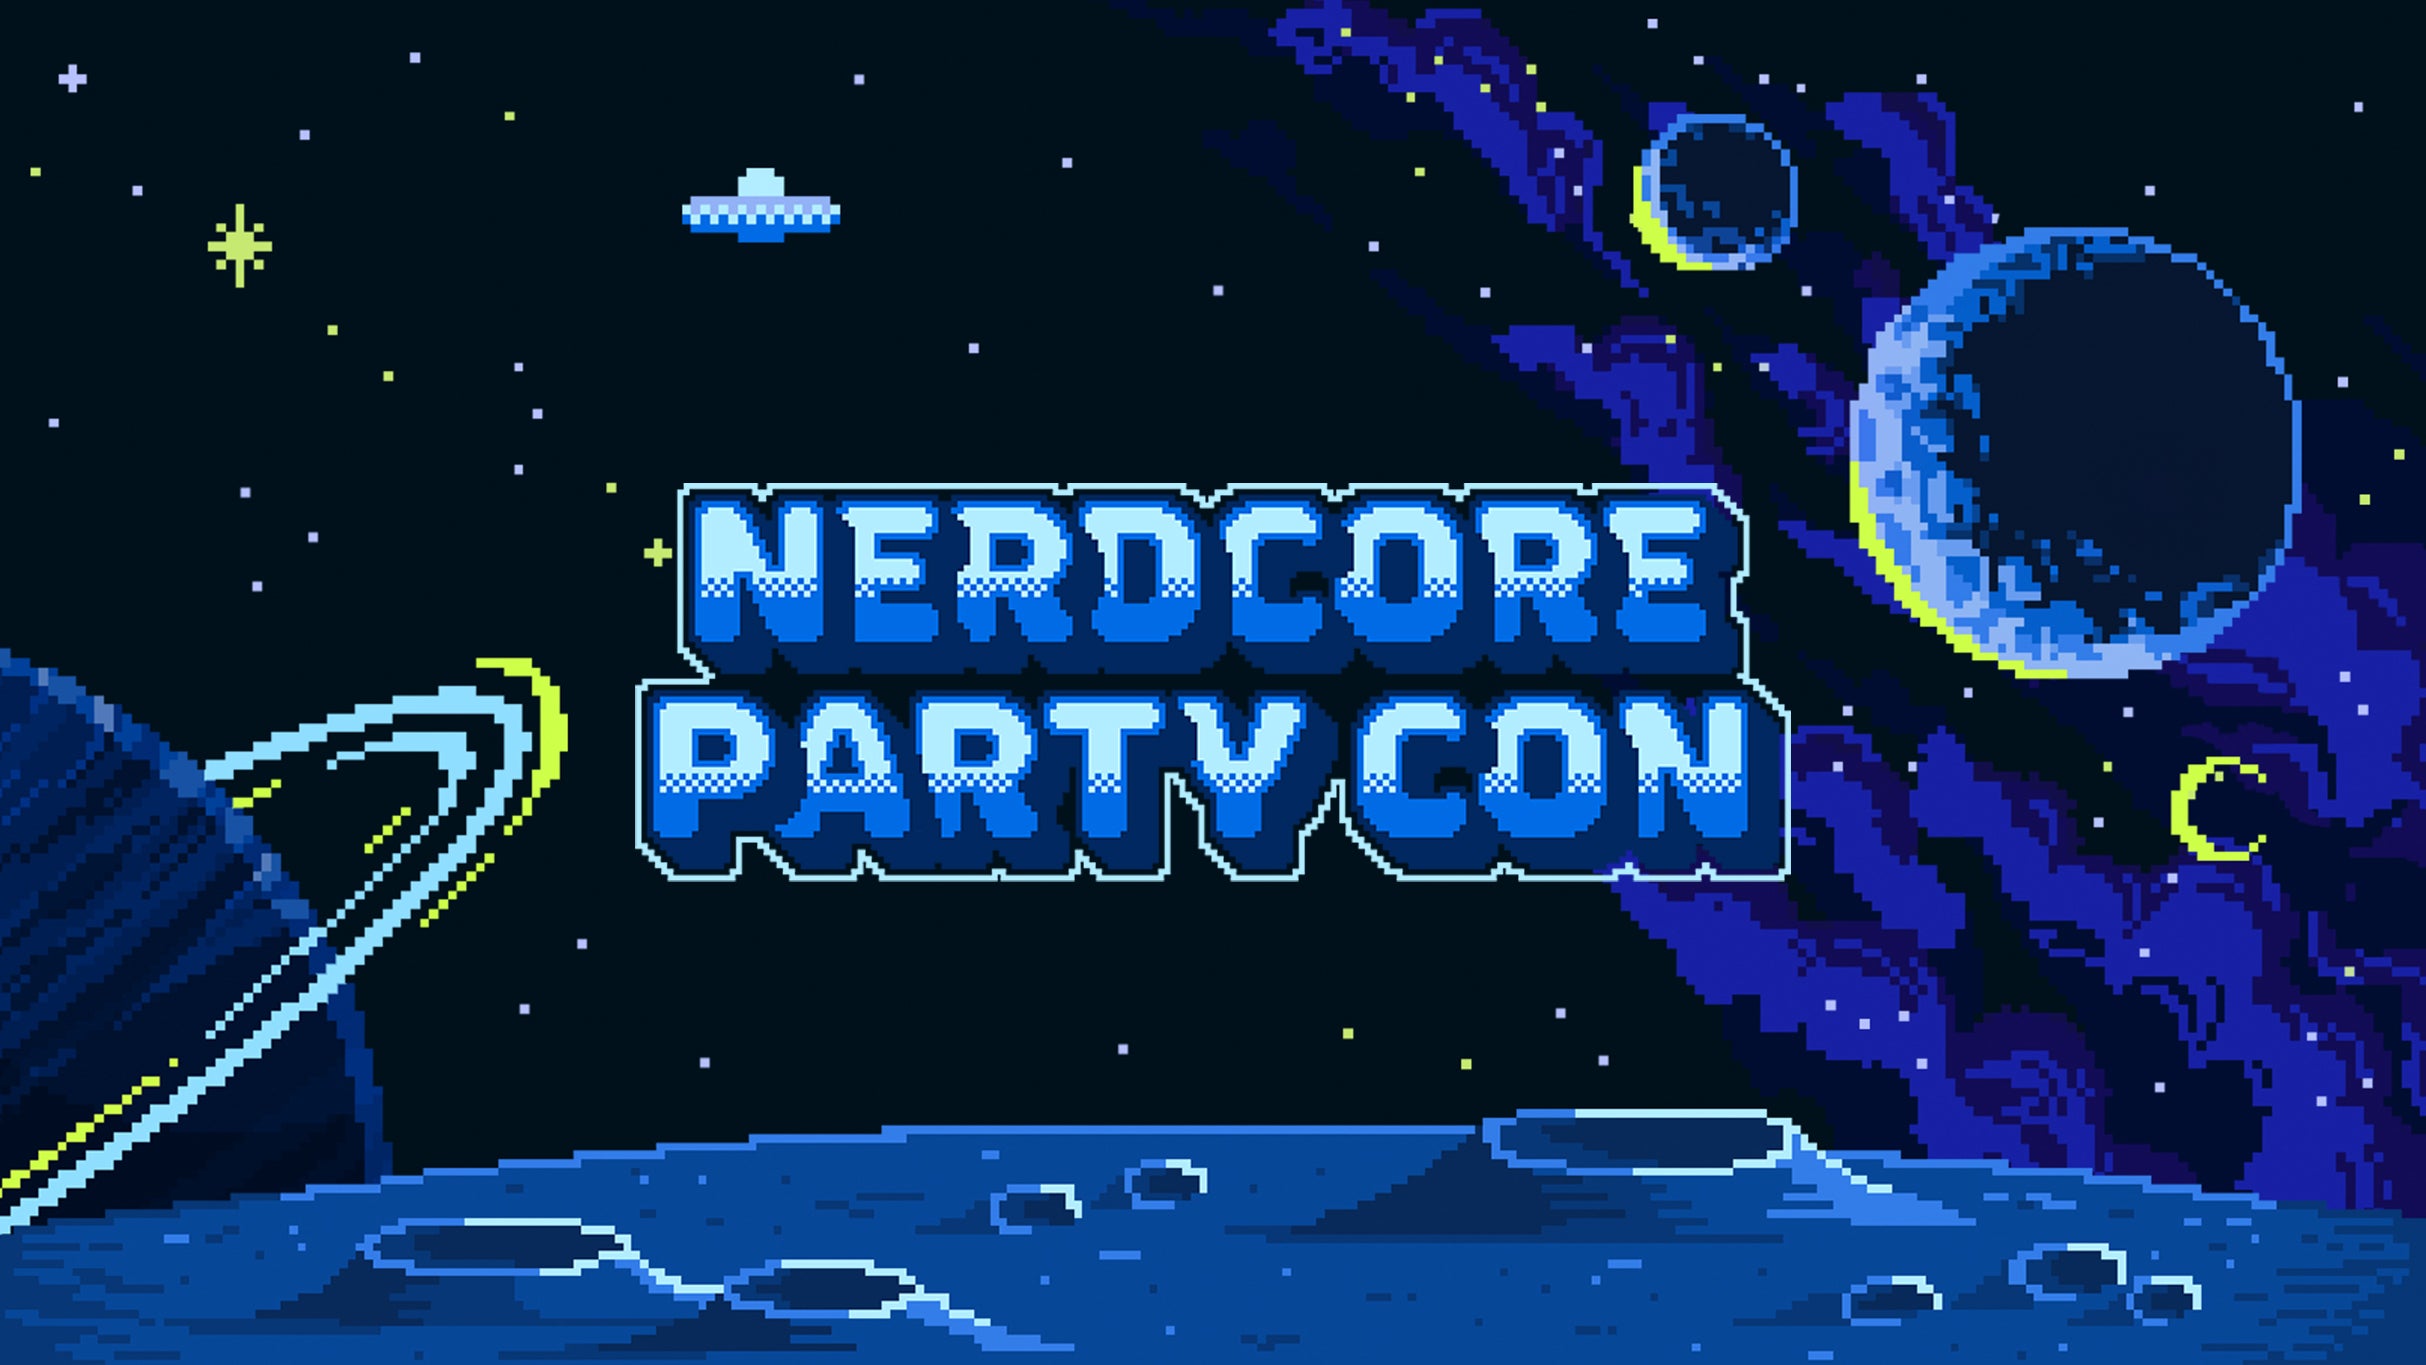 Weekend Tickets - Nerdcore Party Convention at The Ritz